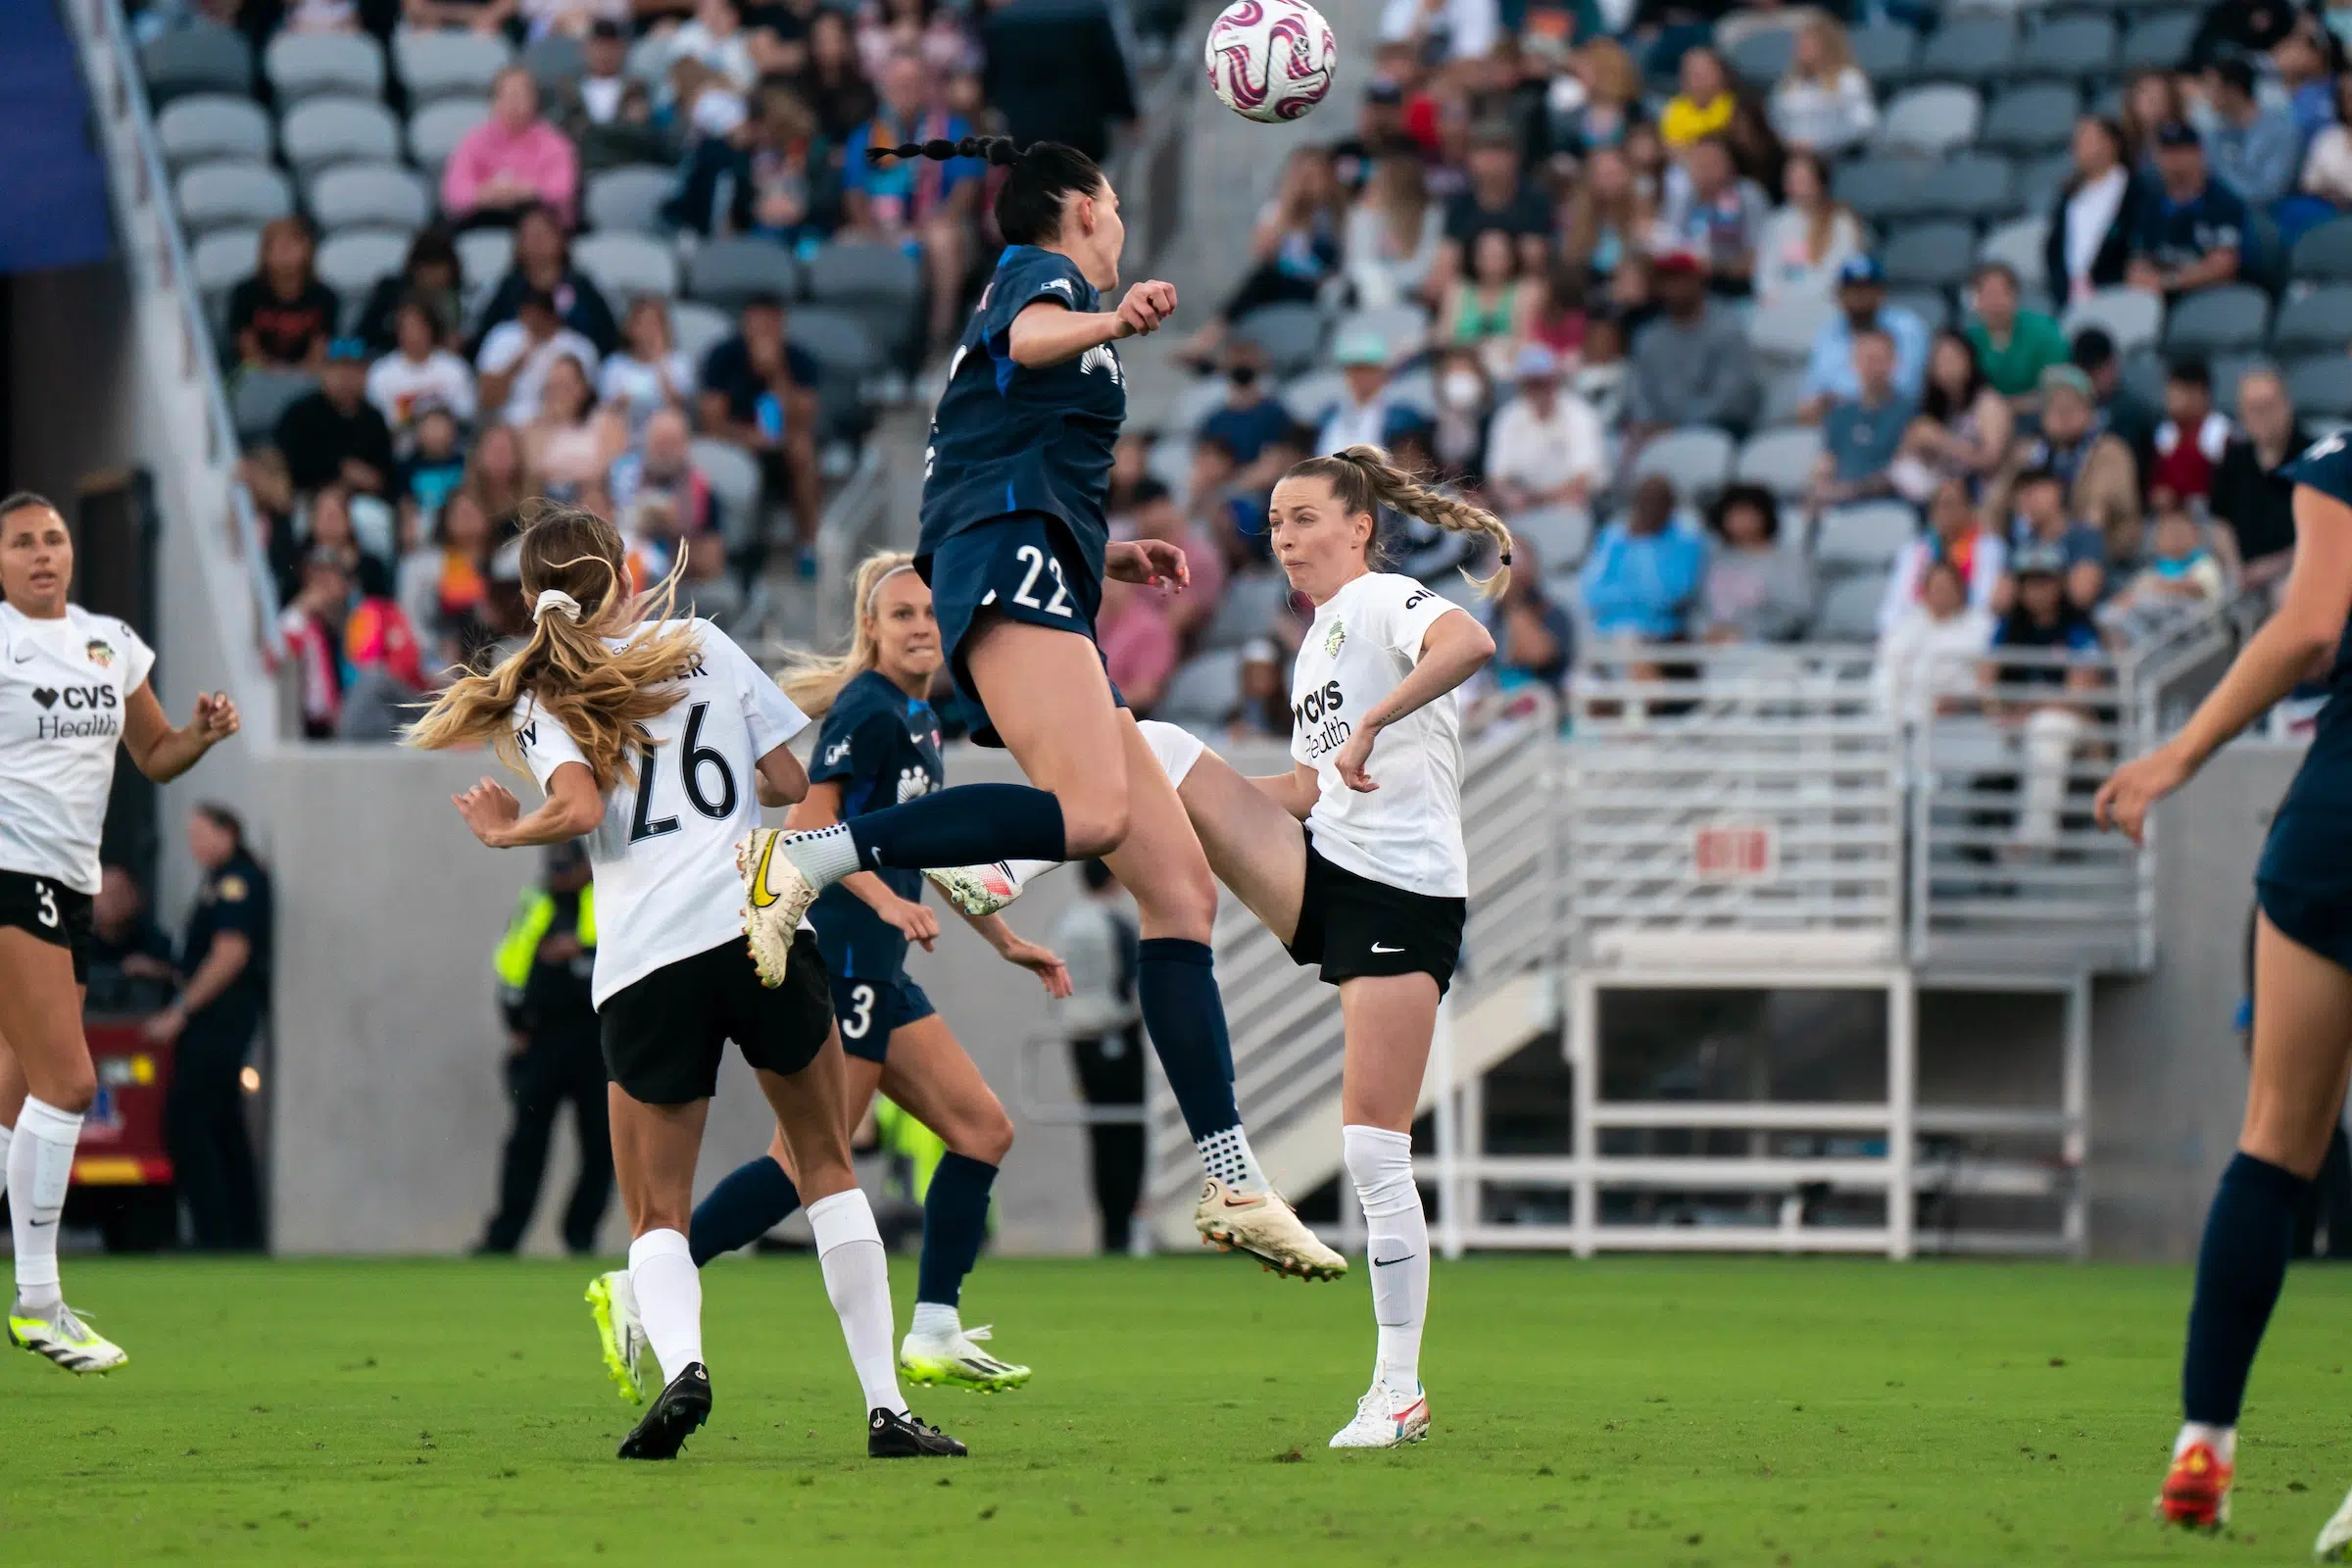 Four soccer players battle for a header.